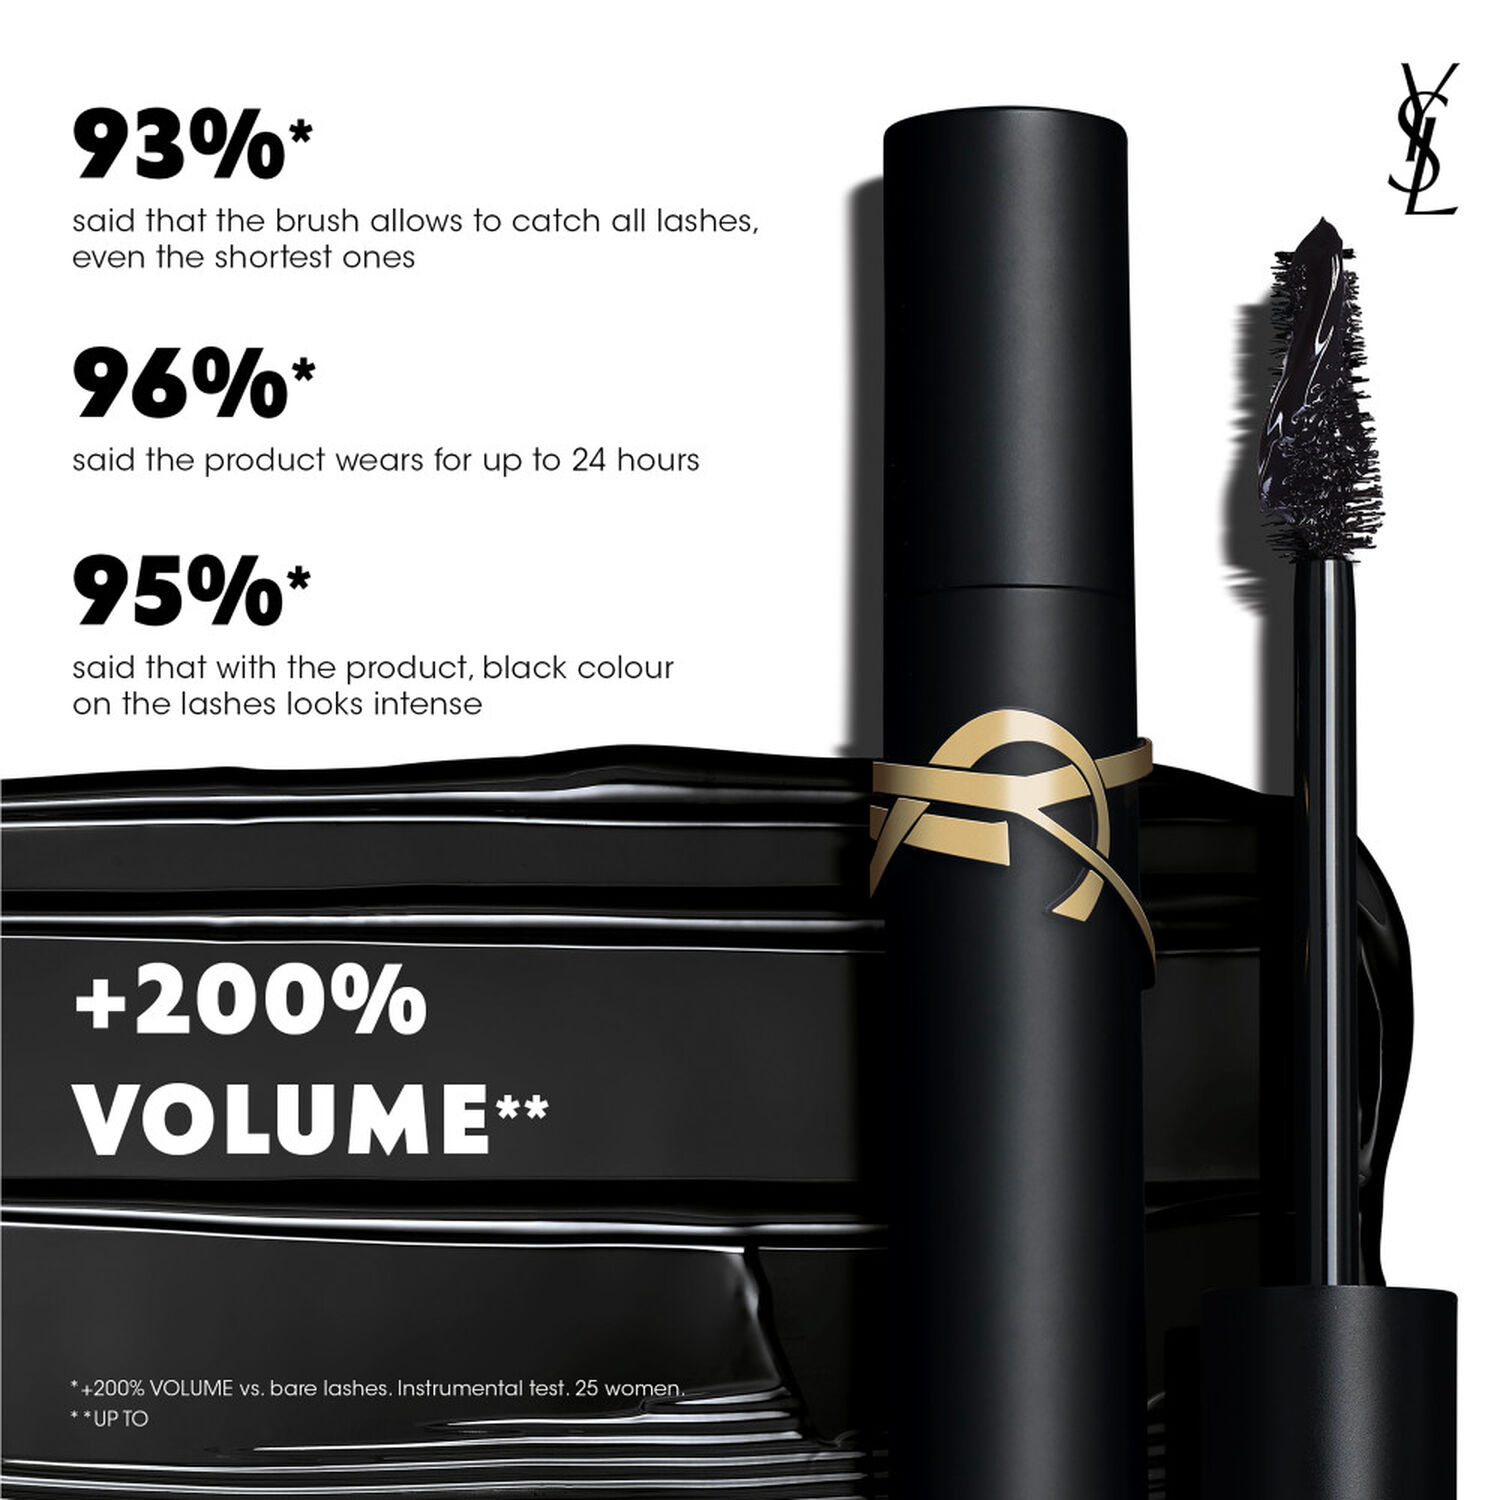 AUGMENT THE CLASH WITH LASH CLASH MASCARA by YSL Beauty International